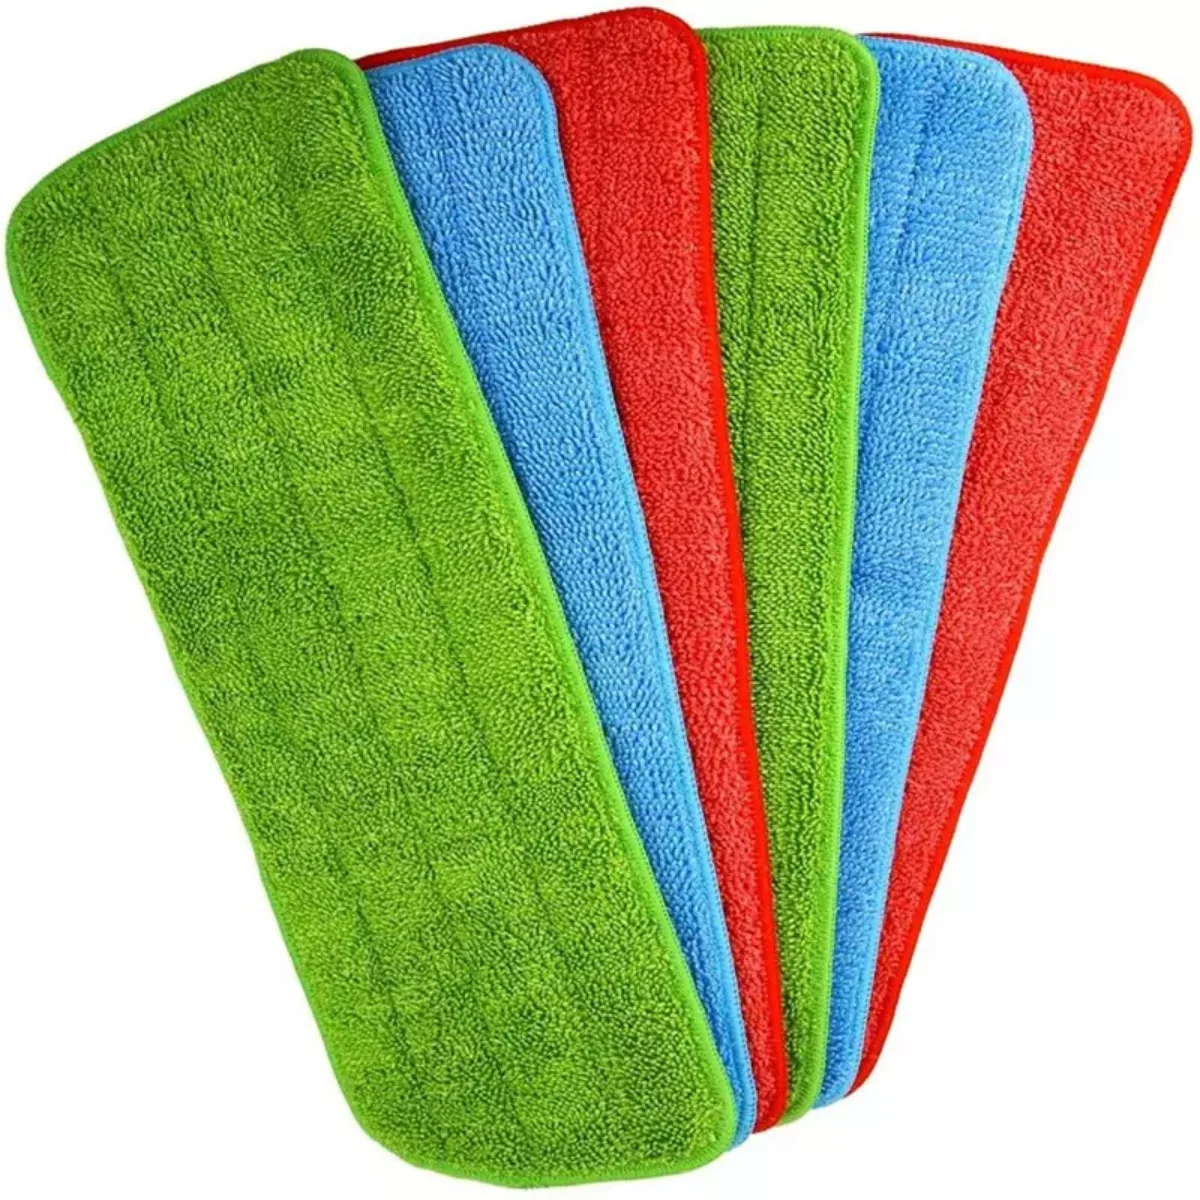 Deep Clean Reusable & Washable Replacement Cleaning Pads Refills Fits for Flat Mop Head 1pc Microfiber Spray Mop Replacement Heads for Wet/Dry Mops 13 x 4.7 